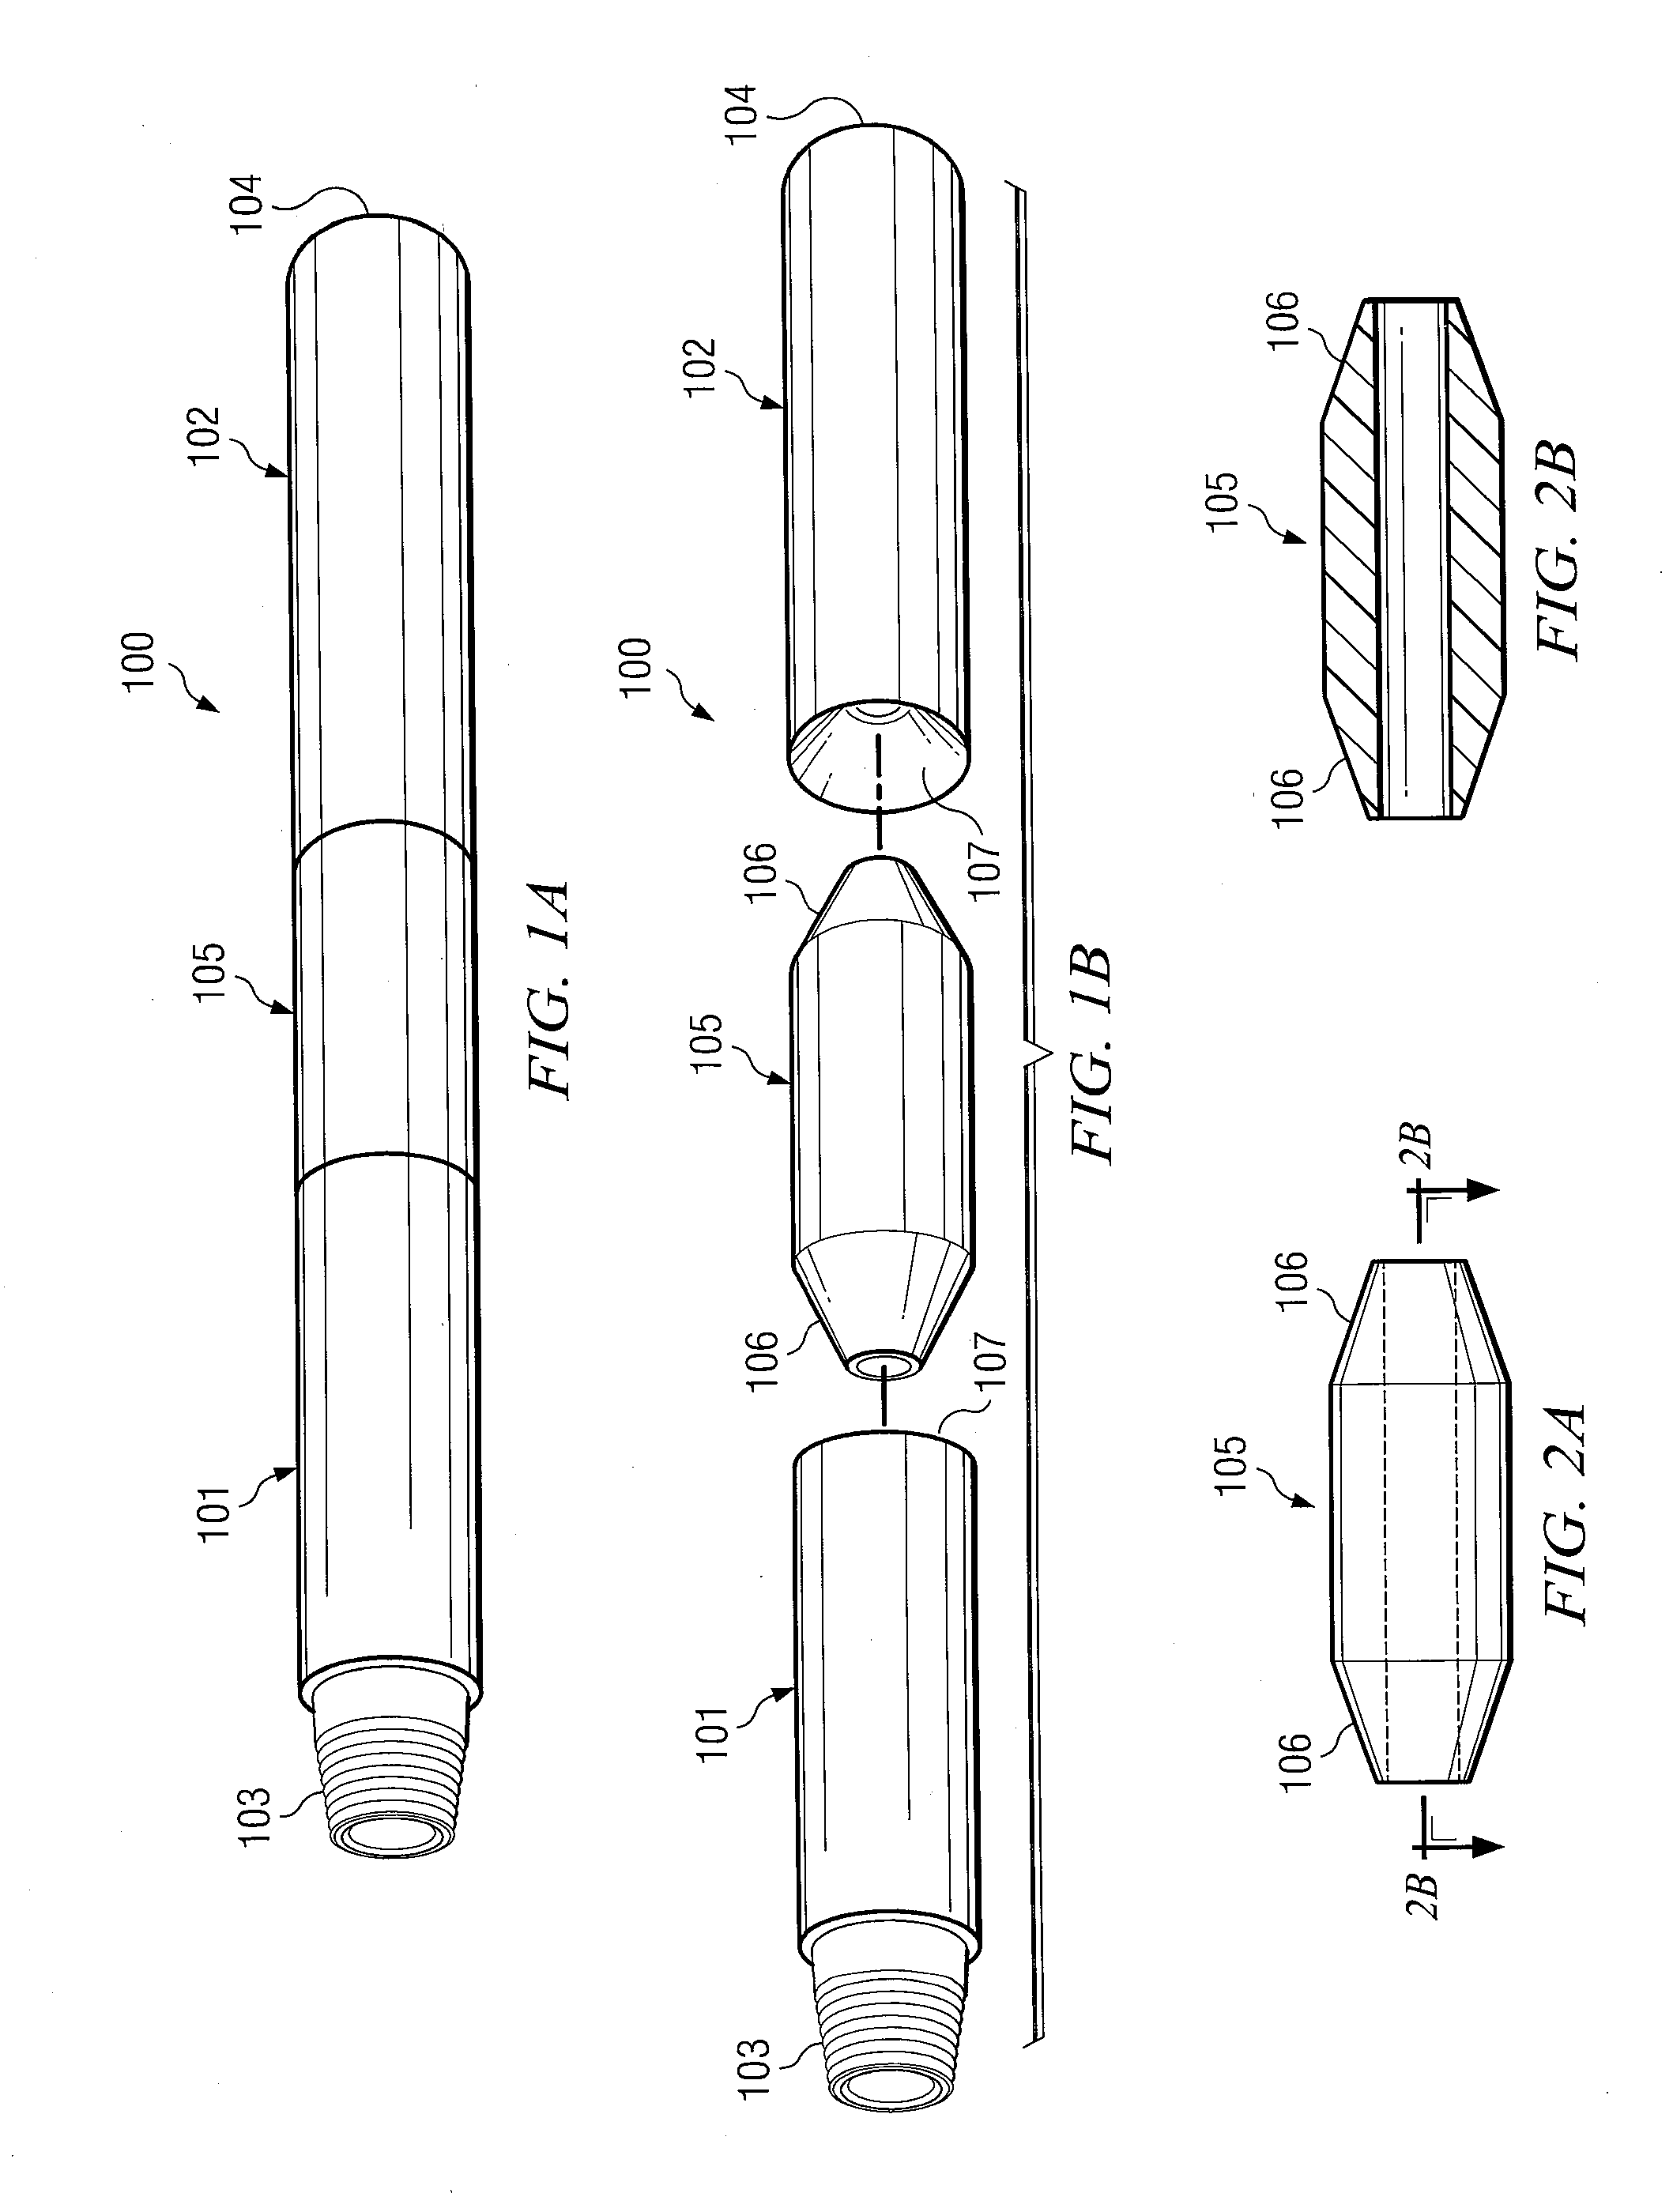 Composite isolation joint for gap sub or internal gap